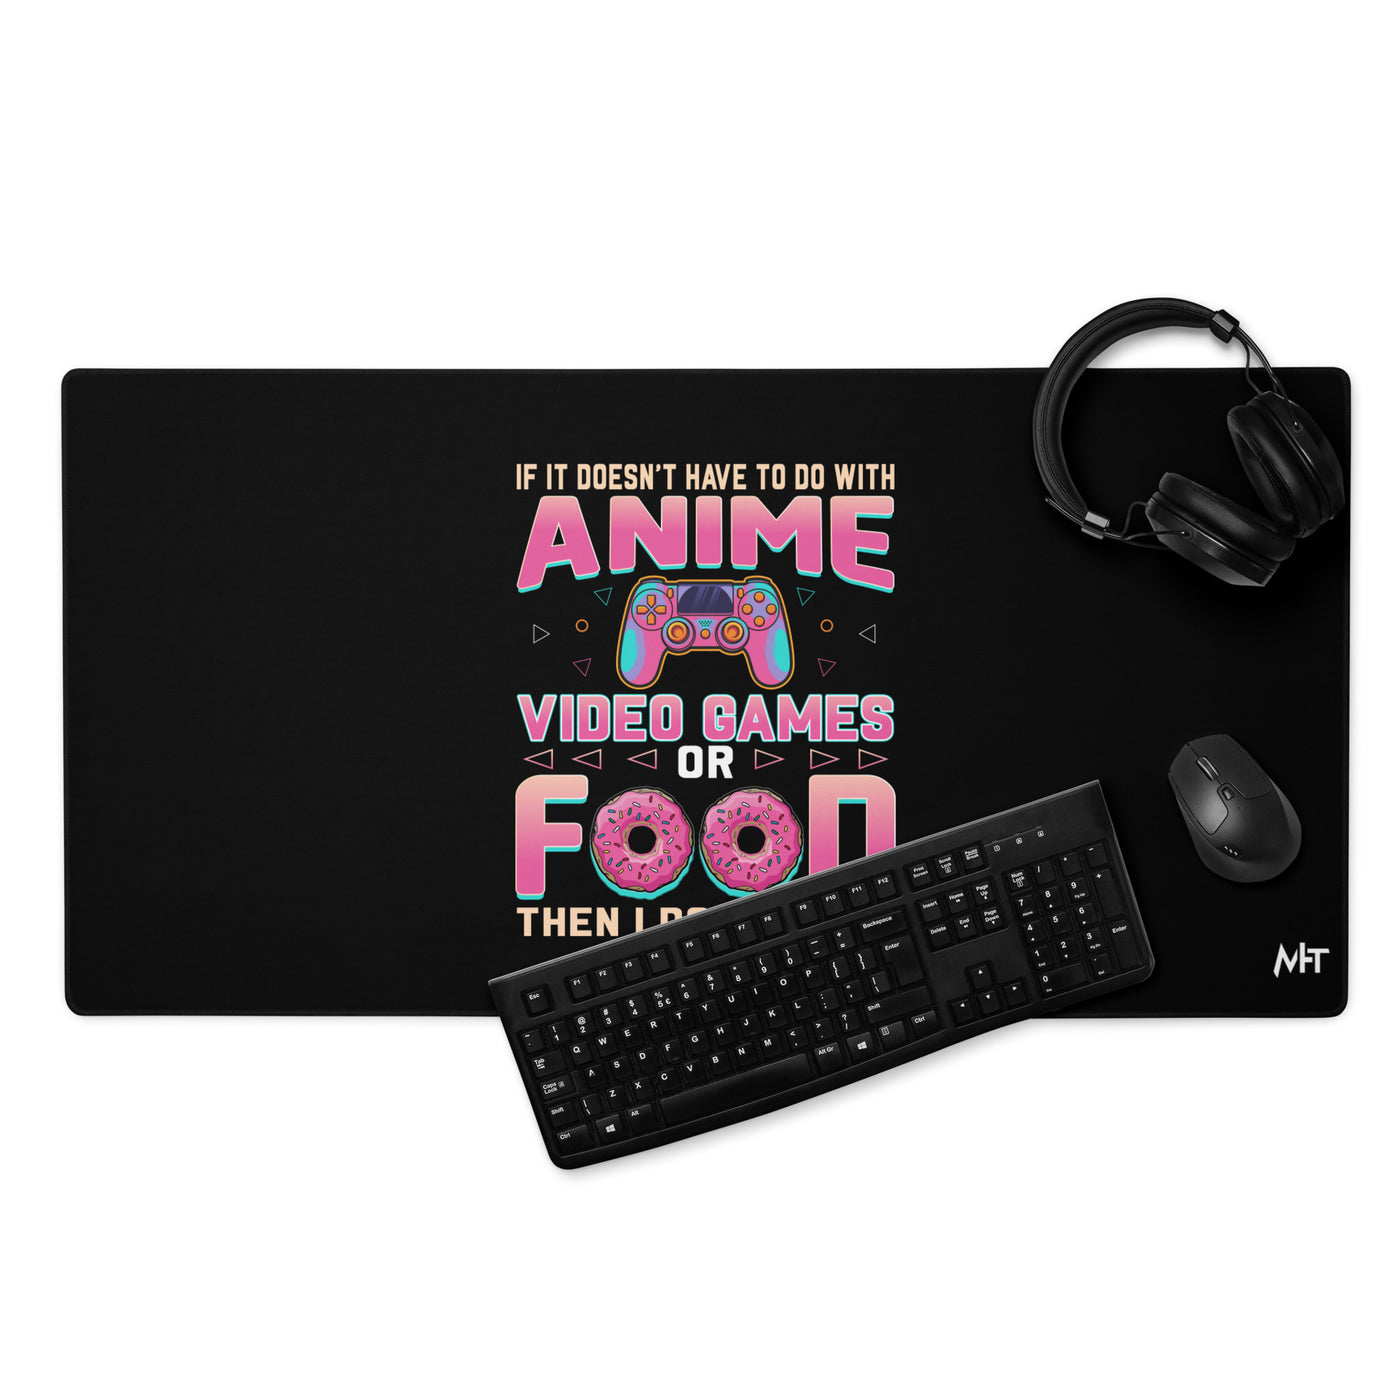 If it doesn't have to do with anime Video game, then I don't care - Desk Mat